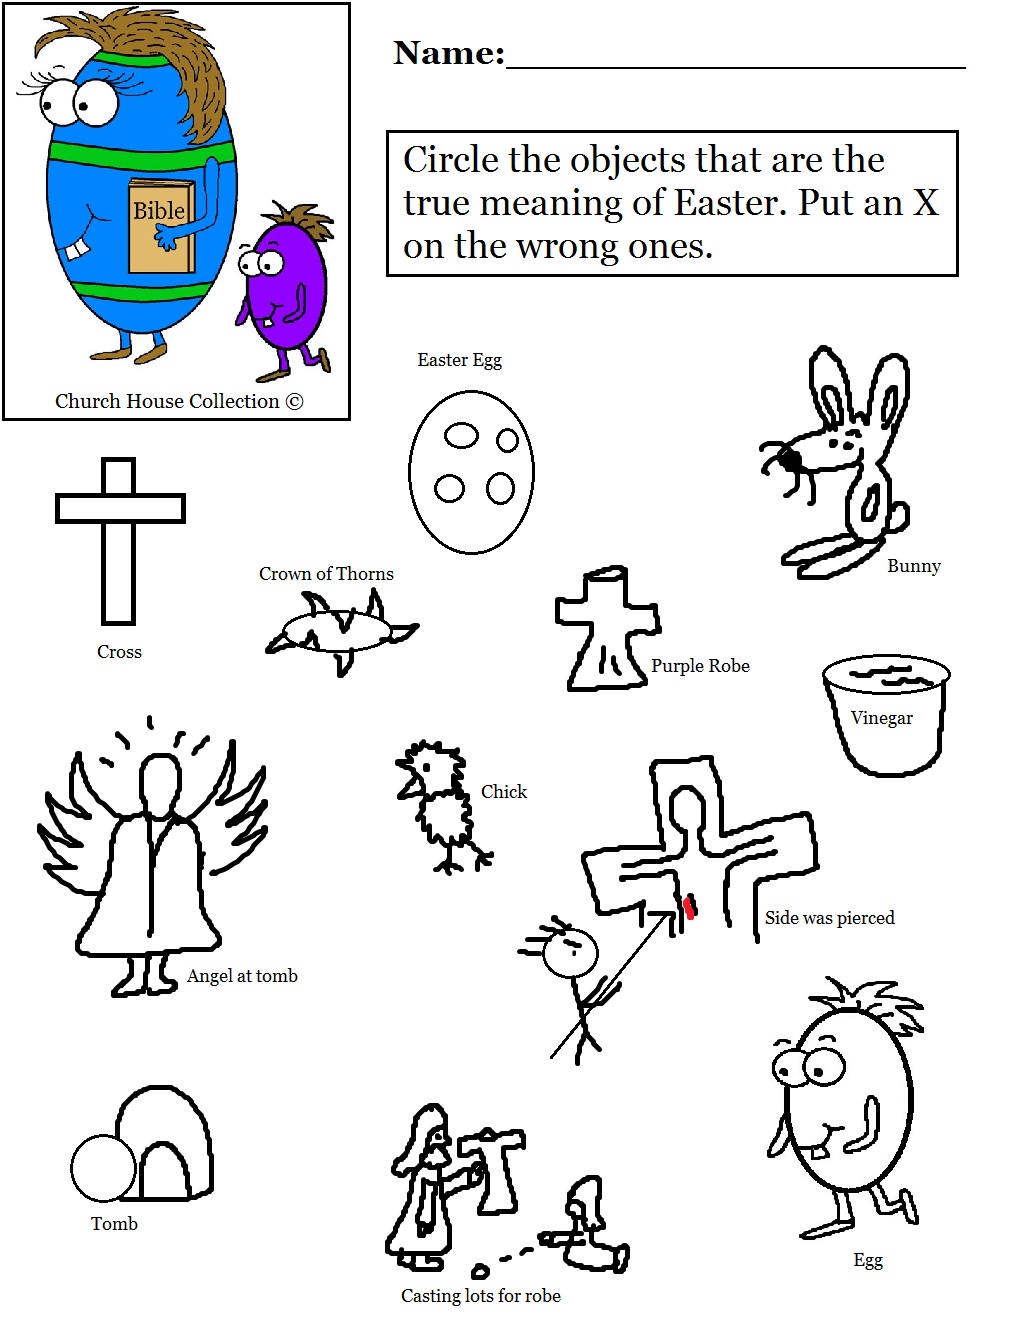 church house collection blog easter egg with bible worksheet